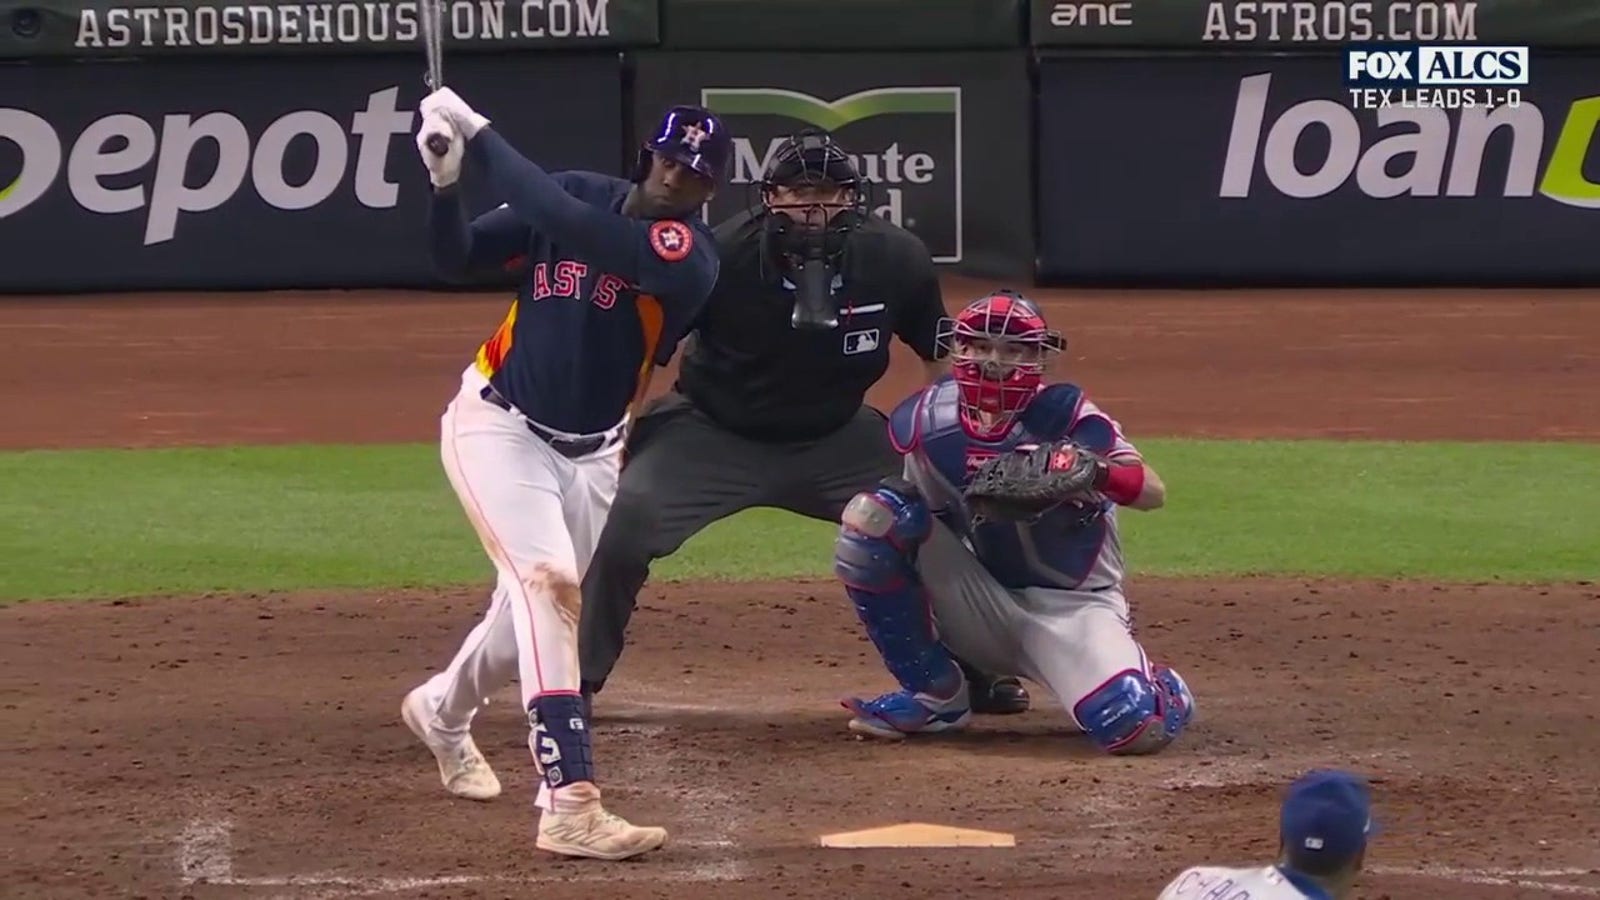 Yordan Álvarez smashes his SECOND home run of the game to cut Astros' deficit against Rangers